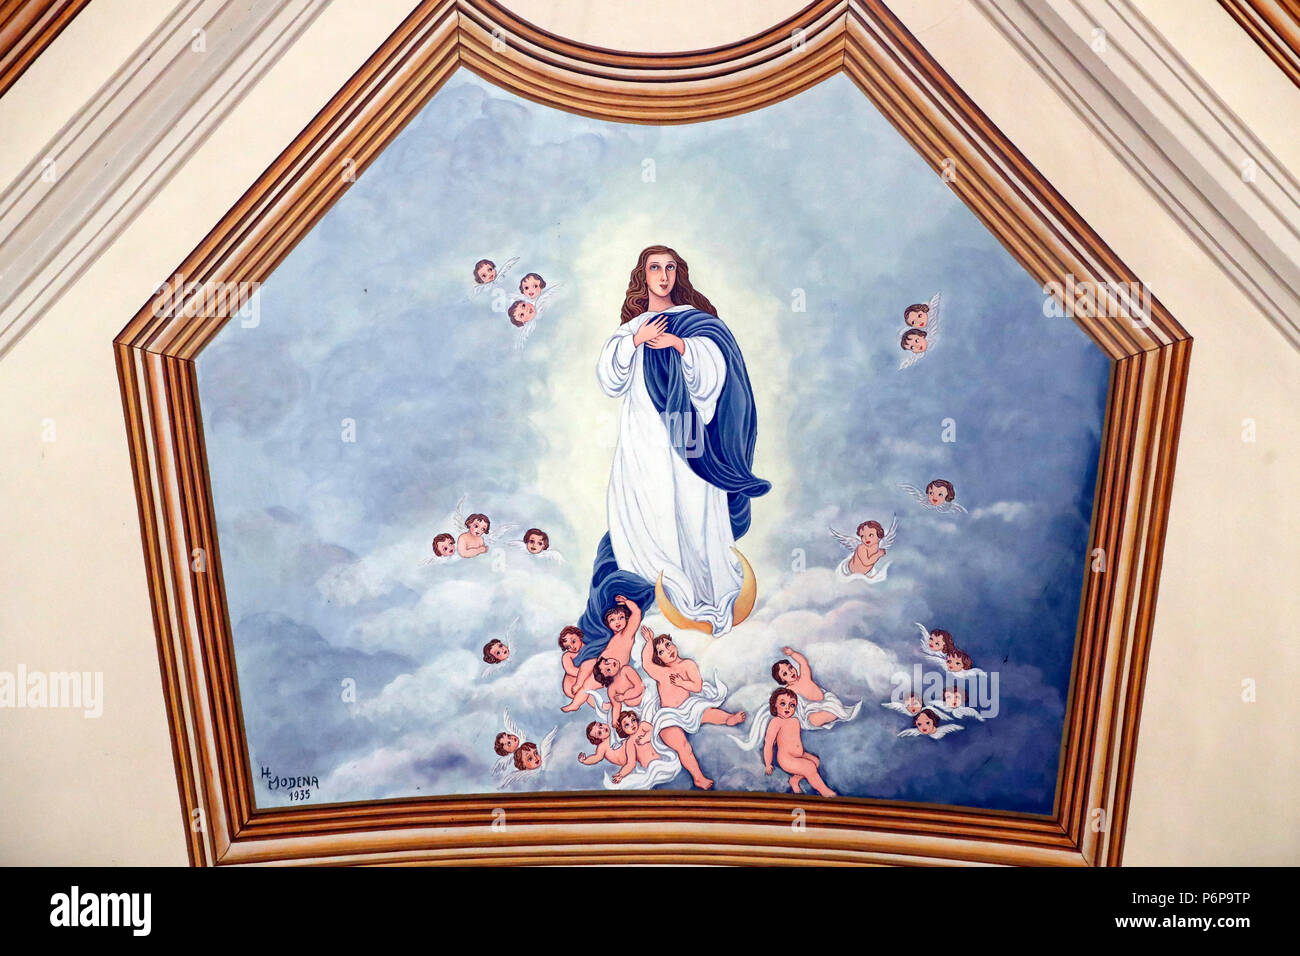 Saint-Andre church.  The Assumption of Mary into Heaven.  Wall painting. Stock Photo